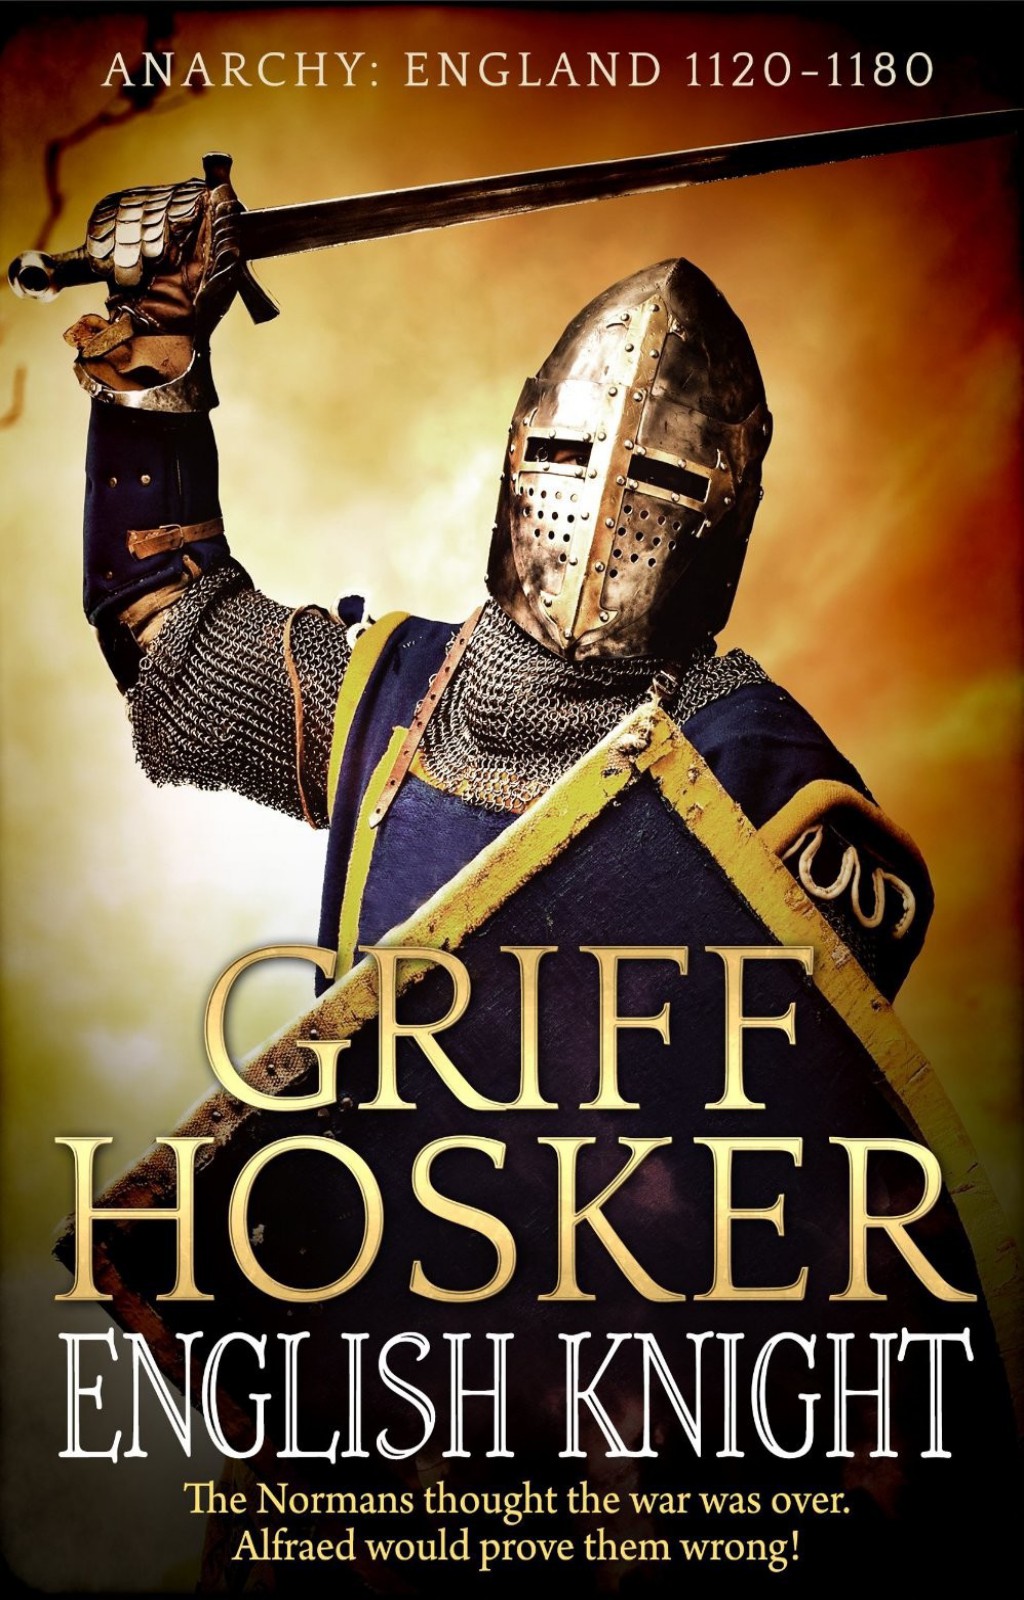 English Knight by Griff Hosker